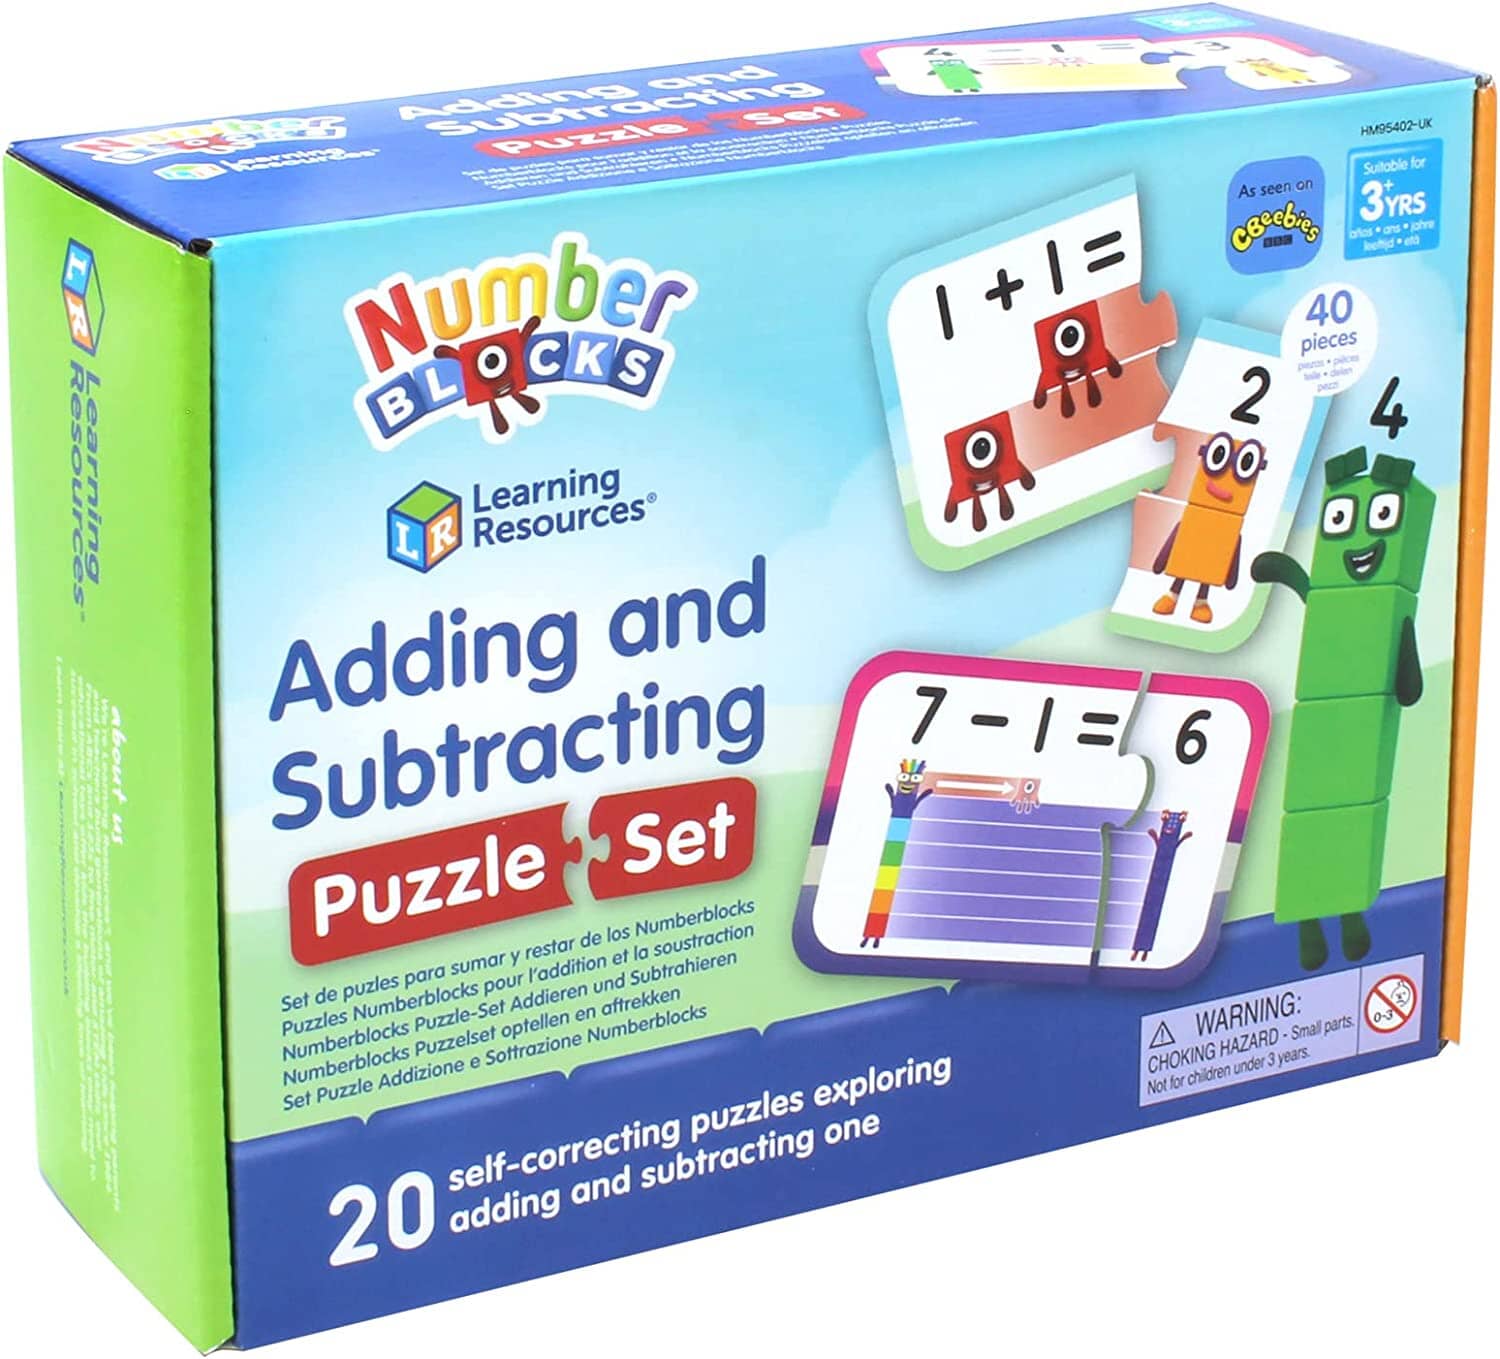 Numberblocks Adding and Subtracting Puzzle Set by Learning Resources - Ages 3 Years+ Learning Resources